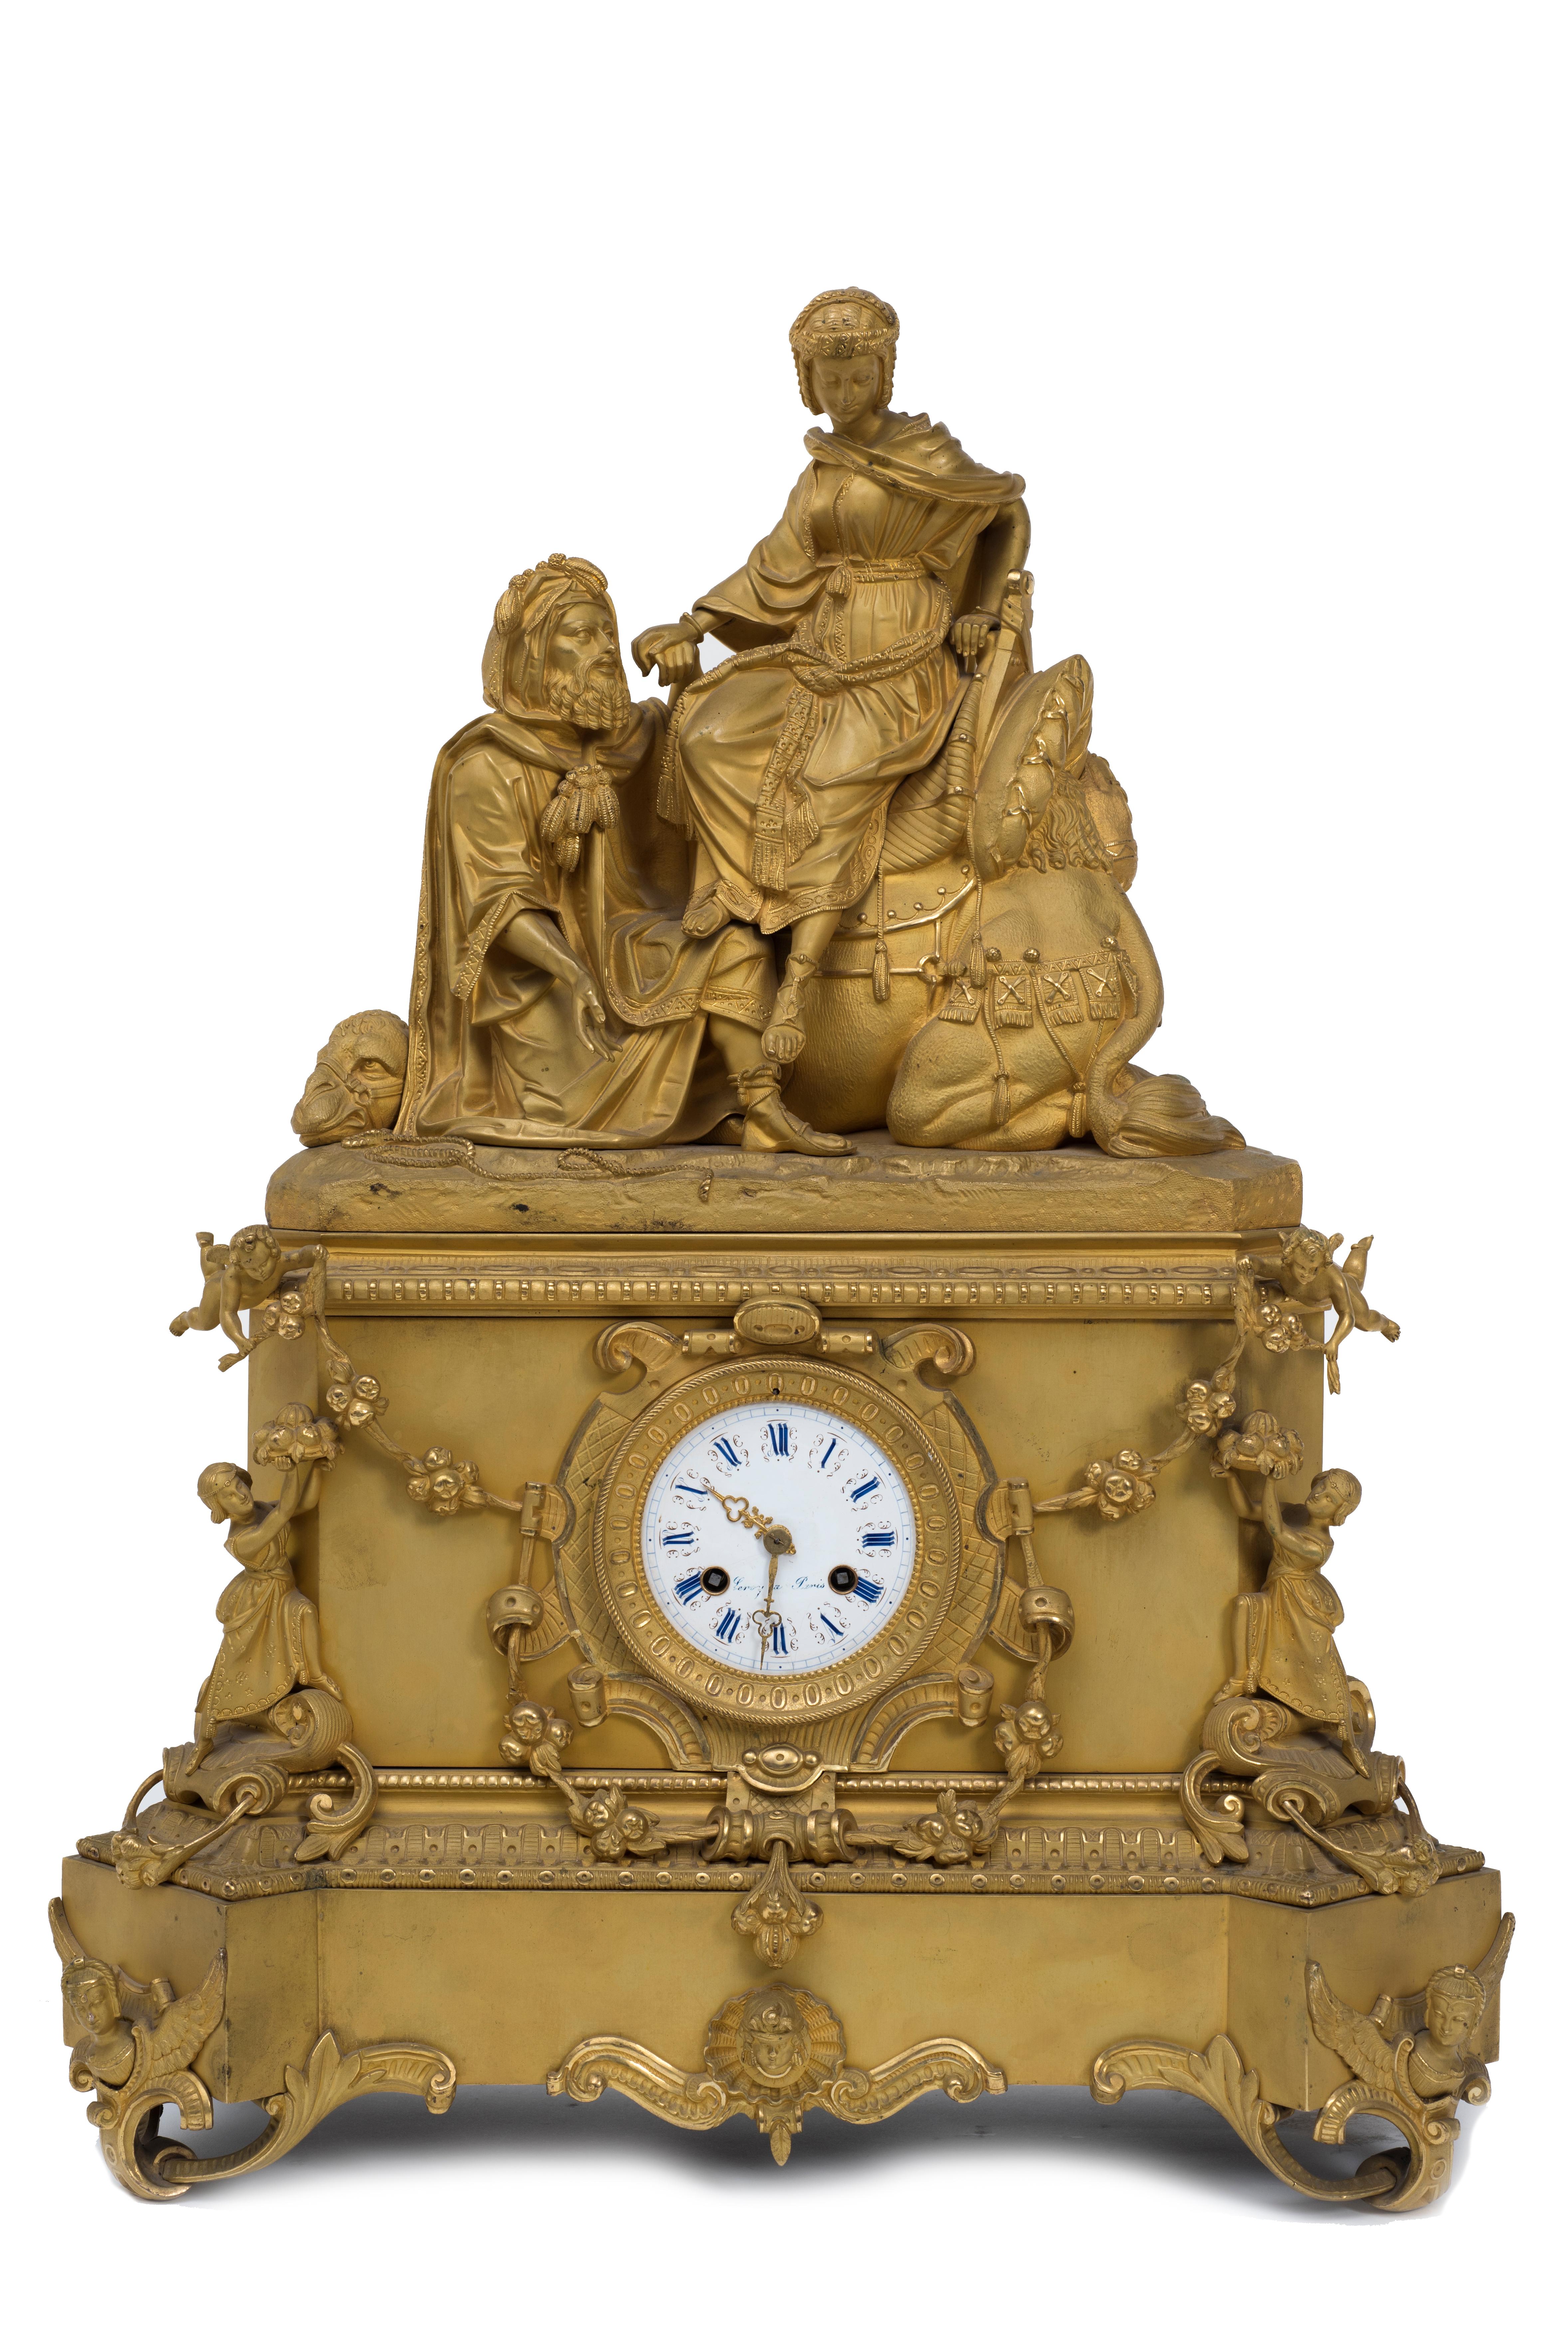 Beautiful table clock with gilt bronze mounts and the dial hand-painted and signed Leroy & Fils.

This object is shipped from Italy. Under existing legislation, any object in Italy created over 70 years ago by an artist who has died requires a